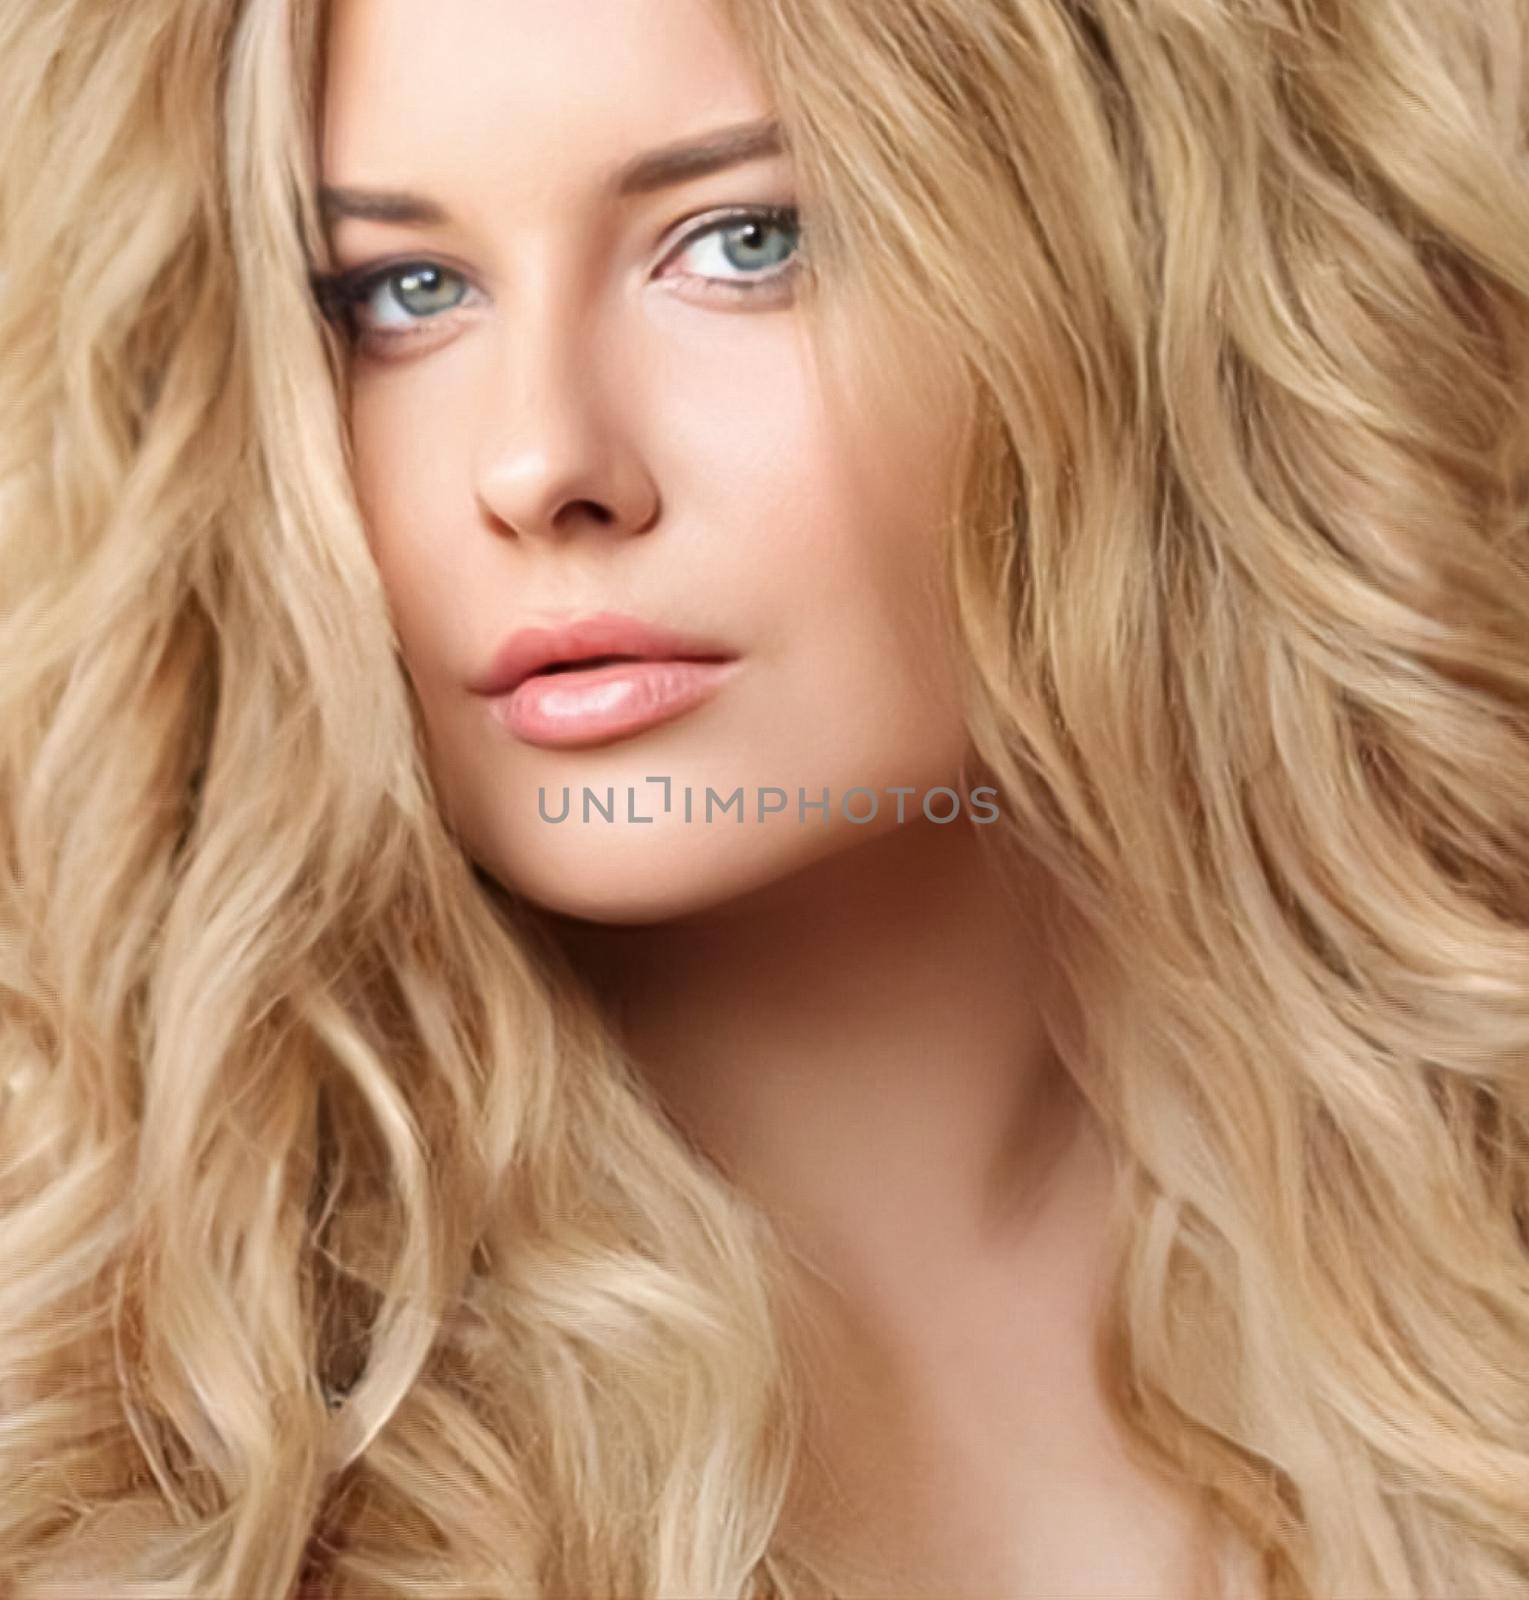 Hairstyle, beauty and hair care, beautiful blonde woman with long blond hair, glamour portrait for hair salon and haircare brand